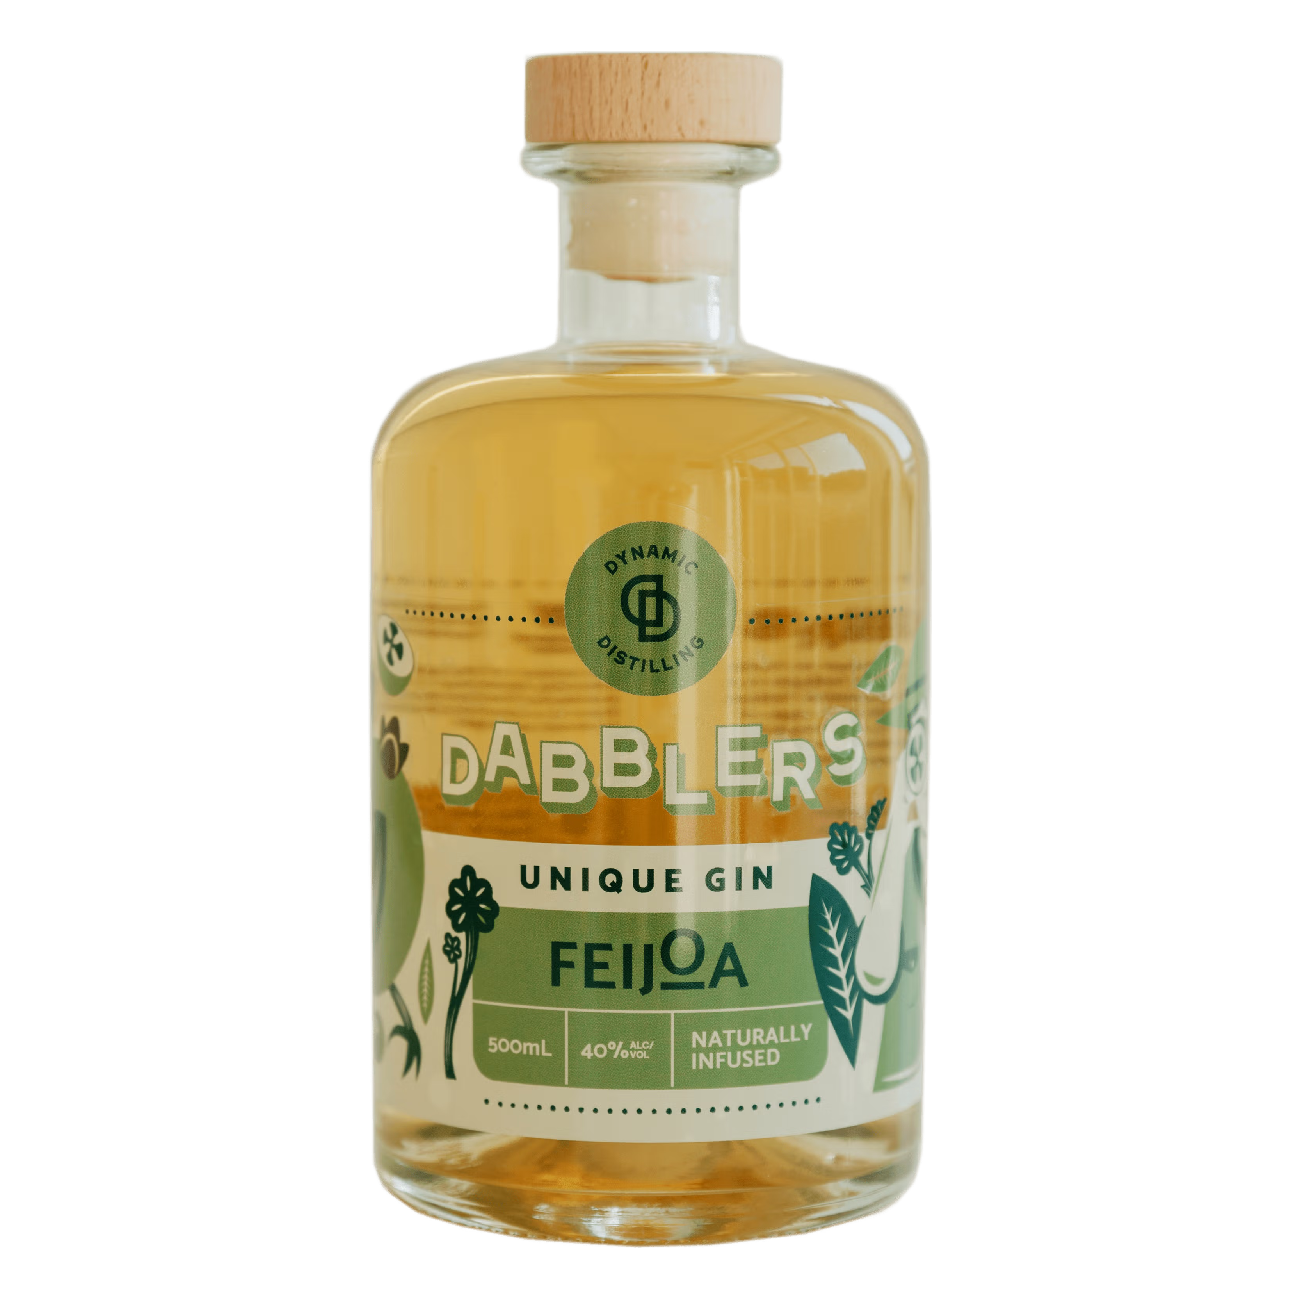 Dabblers Feijoa Gin 500ml LIMITED EDITION (New)